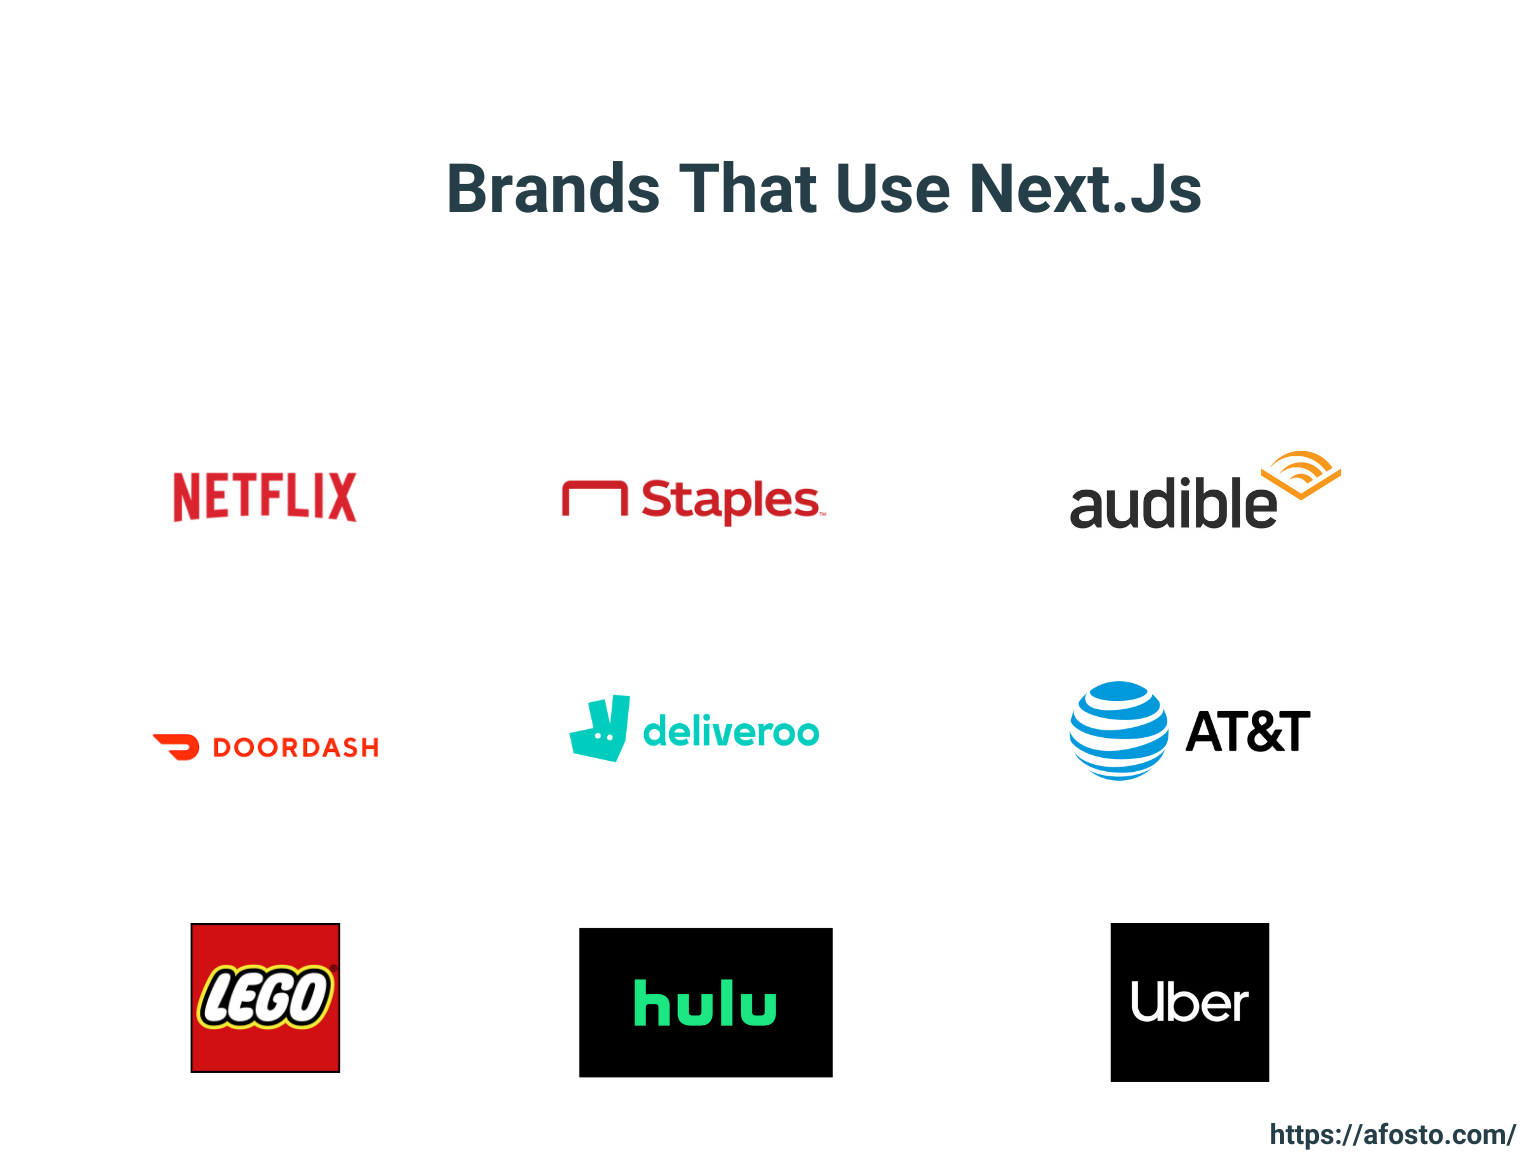 Brands That Use Next.js